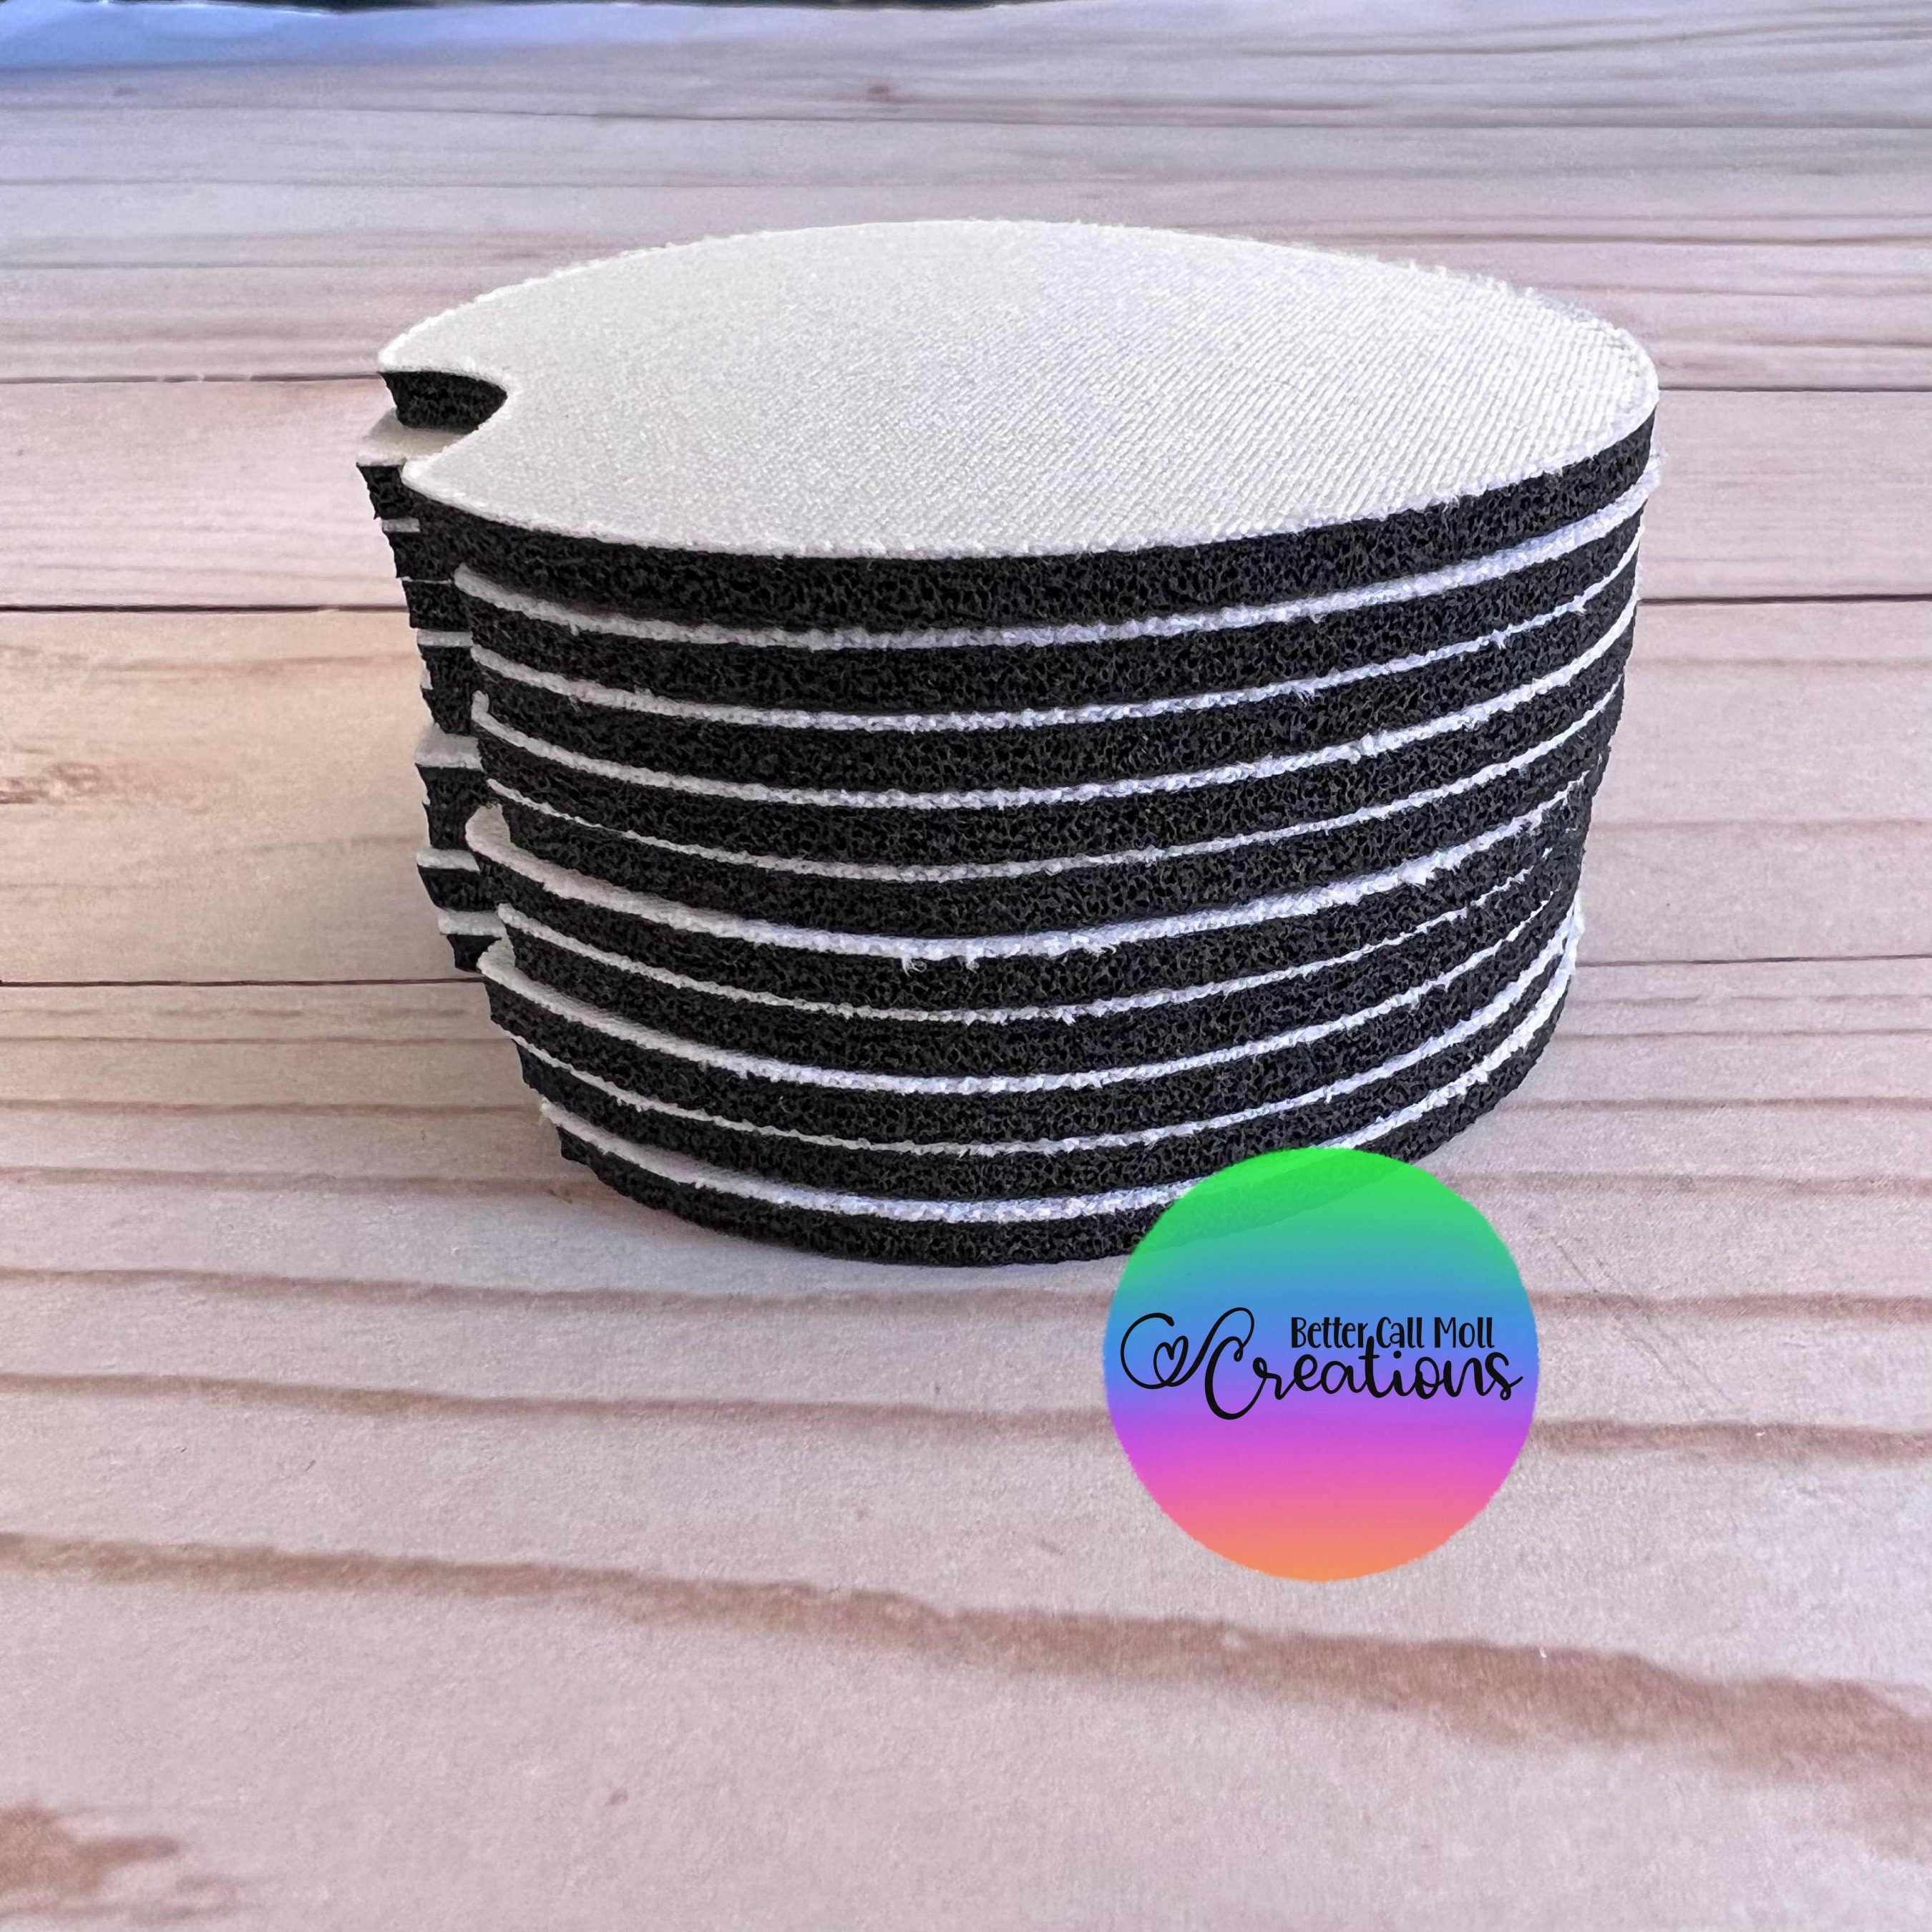 Neoprene Car Coasters Sublimation Blanks (Pack of 2) – Easy Tumblers